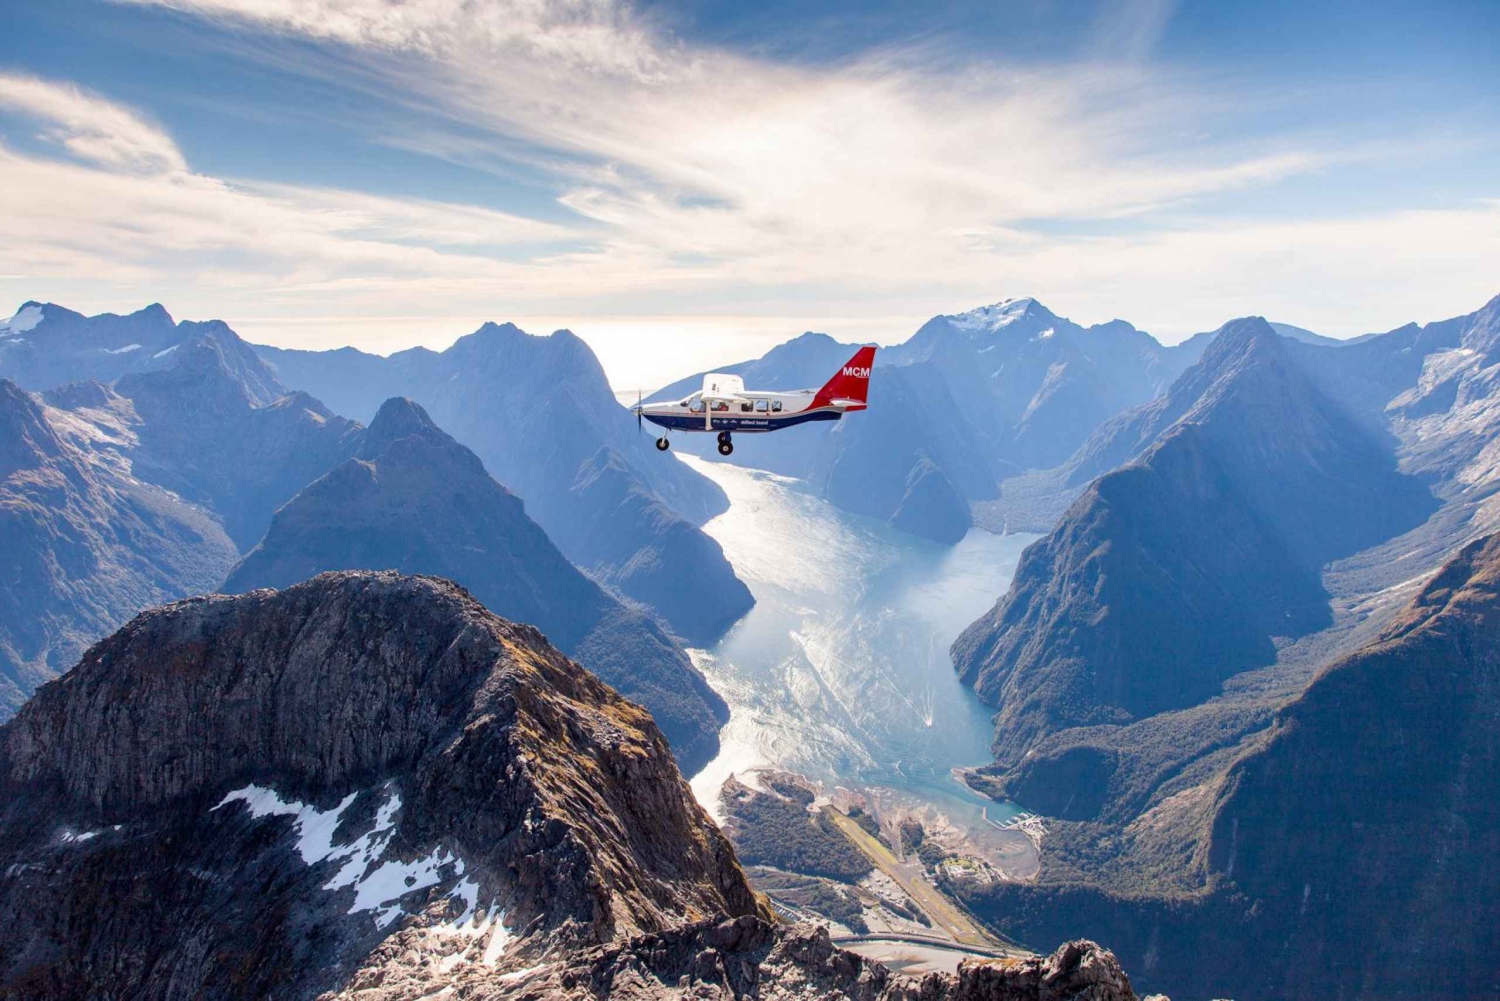 From Queenstown: Milford Sound Full-Day Trip by Plane & Boat